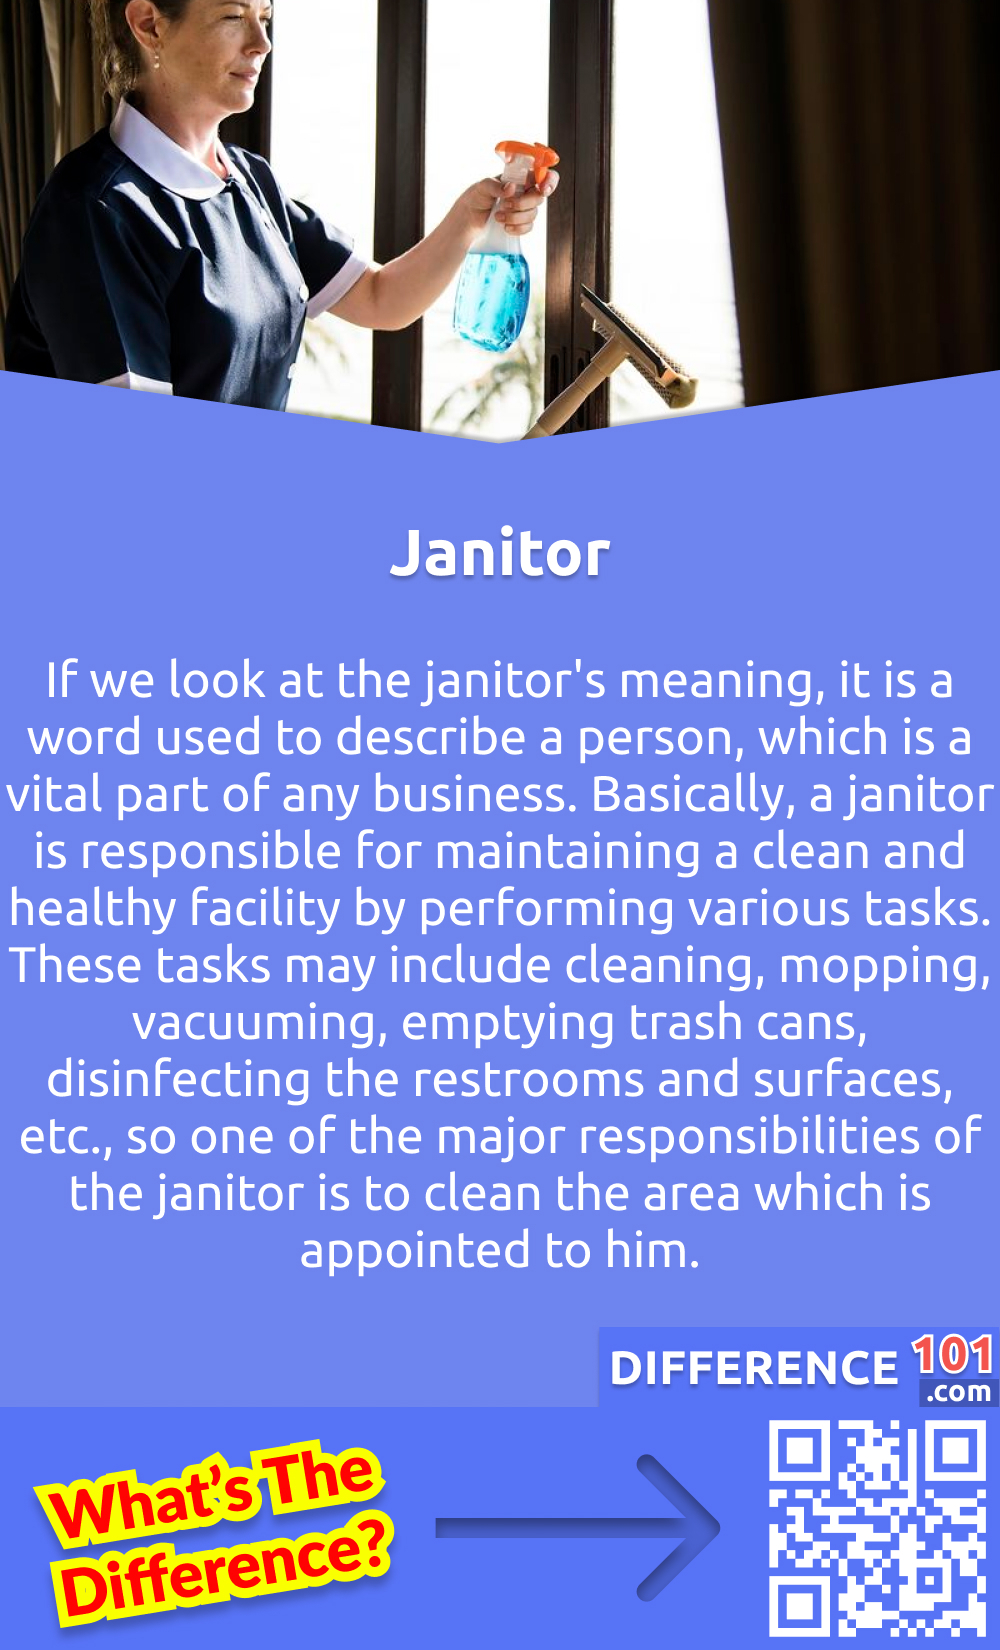 What Is a Janitor? If we look at the janitor's meaning, it is a word used to describe a person, which is a vital part of any business. Basically, a janitor is responsible for maintaining a clean and healthy facility by performing various tasks. These tasks may include cleaning, mopping, vacuuming, emptying trash cans, disinfecting the restrooms and surfaces, etc., so one of the major responsibilities of the janitor is to clean the area which is appointed to him. There are many other names for the janitor, like caretaker, gatekeeper, attendant, doorkeeper, and steward. These all are the different terms used for janitors. Most people think that the duty of the janitor is to clean public areas like schools, hospitals, workplaces and airports. But the main responsibilities of a Janitor include vacuuming carpets, cleaning toilets, wiping windows, dusting furniture, removing trash, and mopping floors. In some situations, janitors also take responsibility for protection and maintenance.